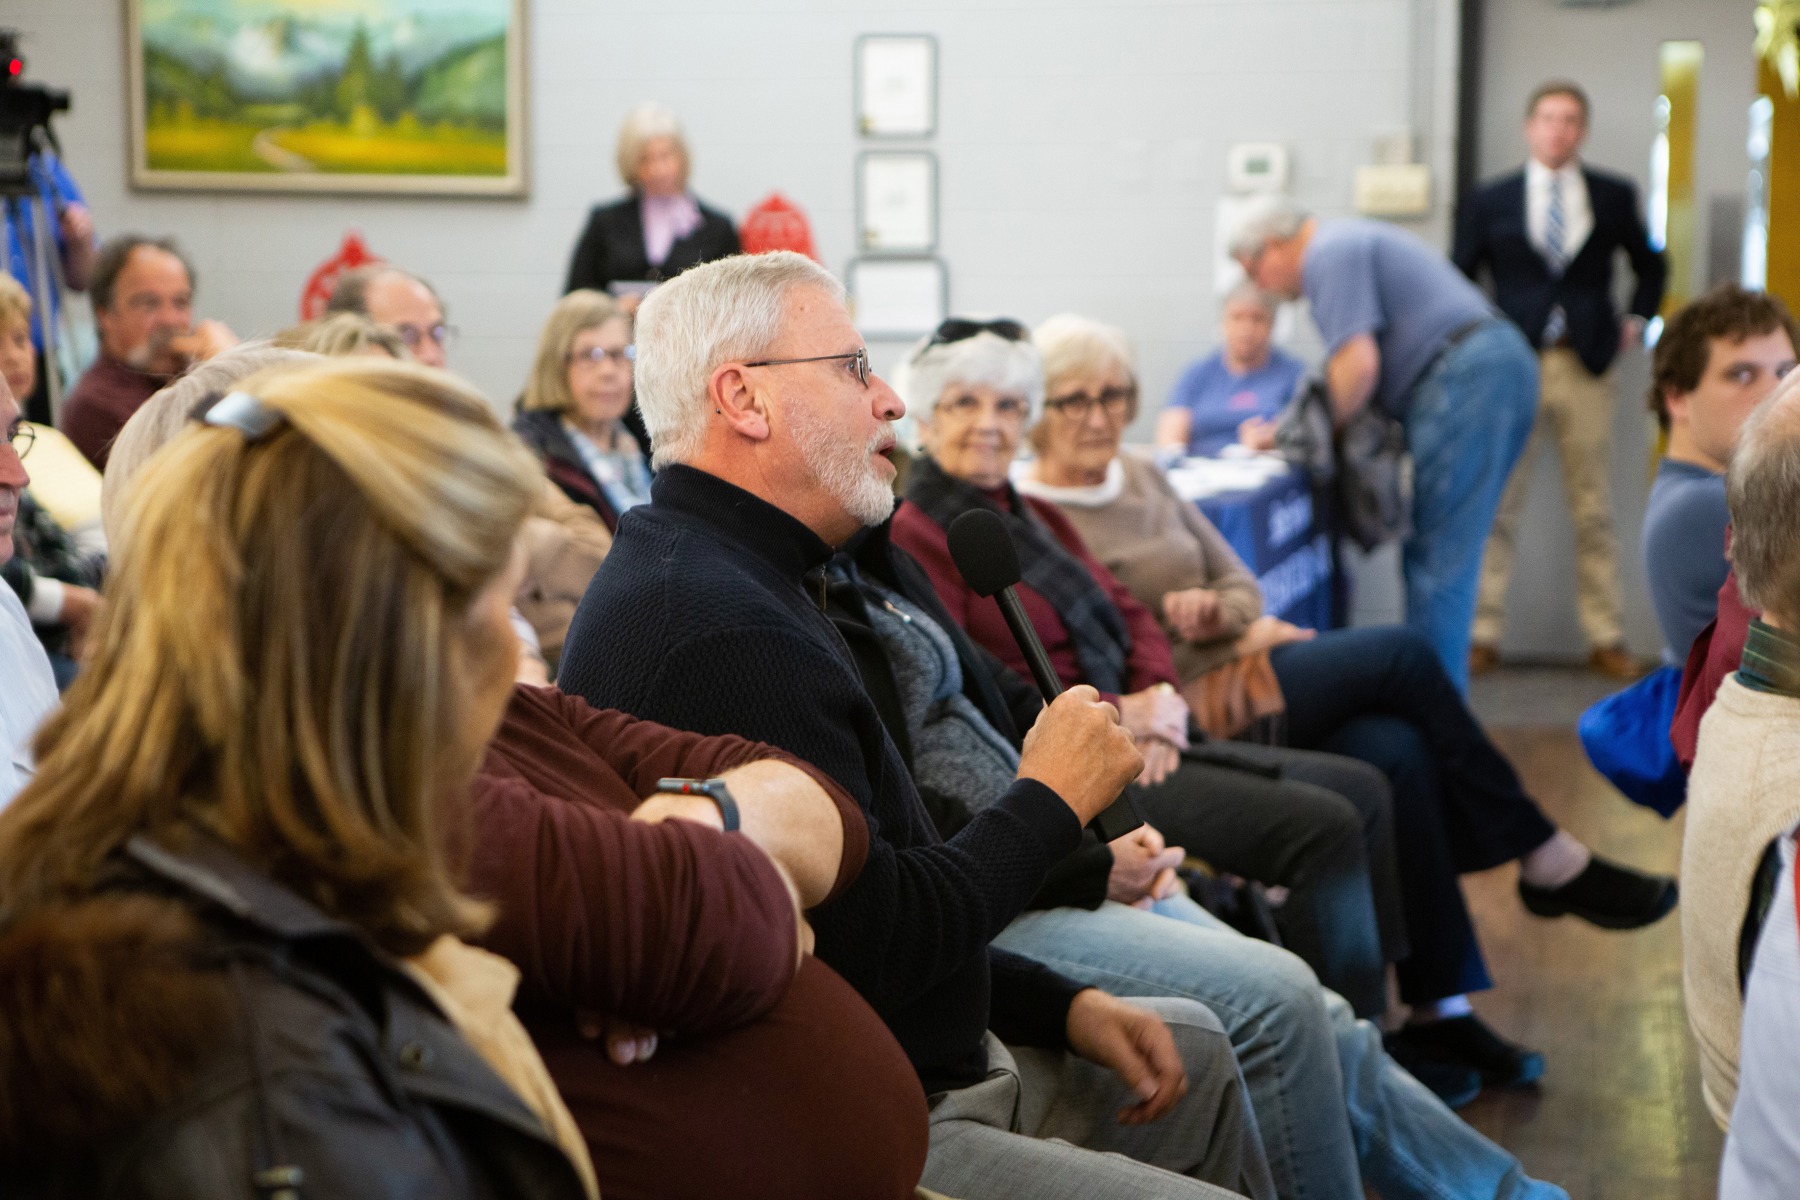 November 15, 2019: More than 100 people crowded the Central Bucks Senior Activity Center in Doylestown today for a Legislative Breakfast hosted by state Sen. Steve Santarsiero.  The audience aired concerns about a wide range of subjects including property taxes and gun violence.